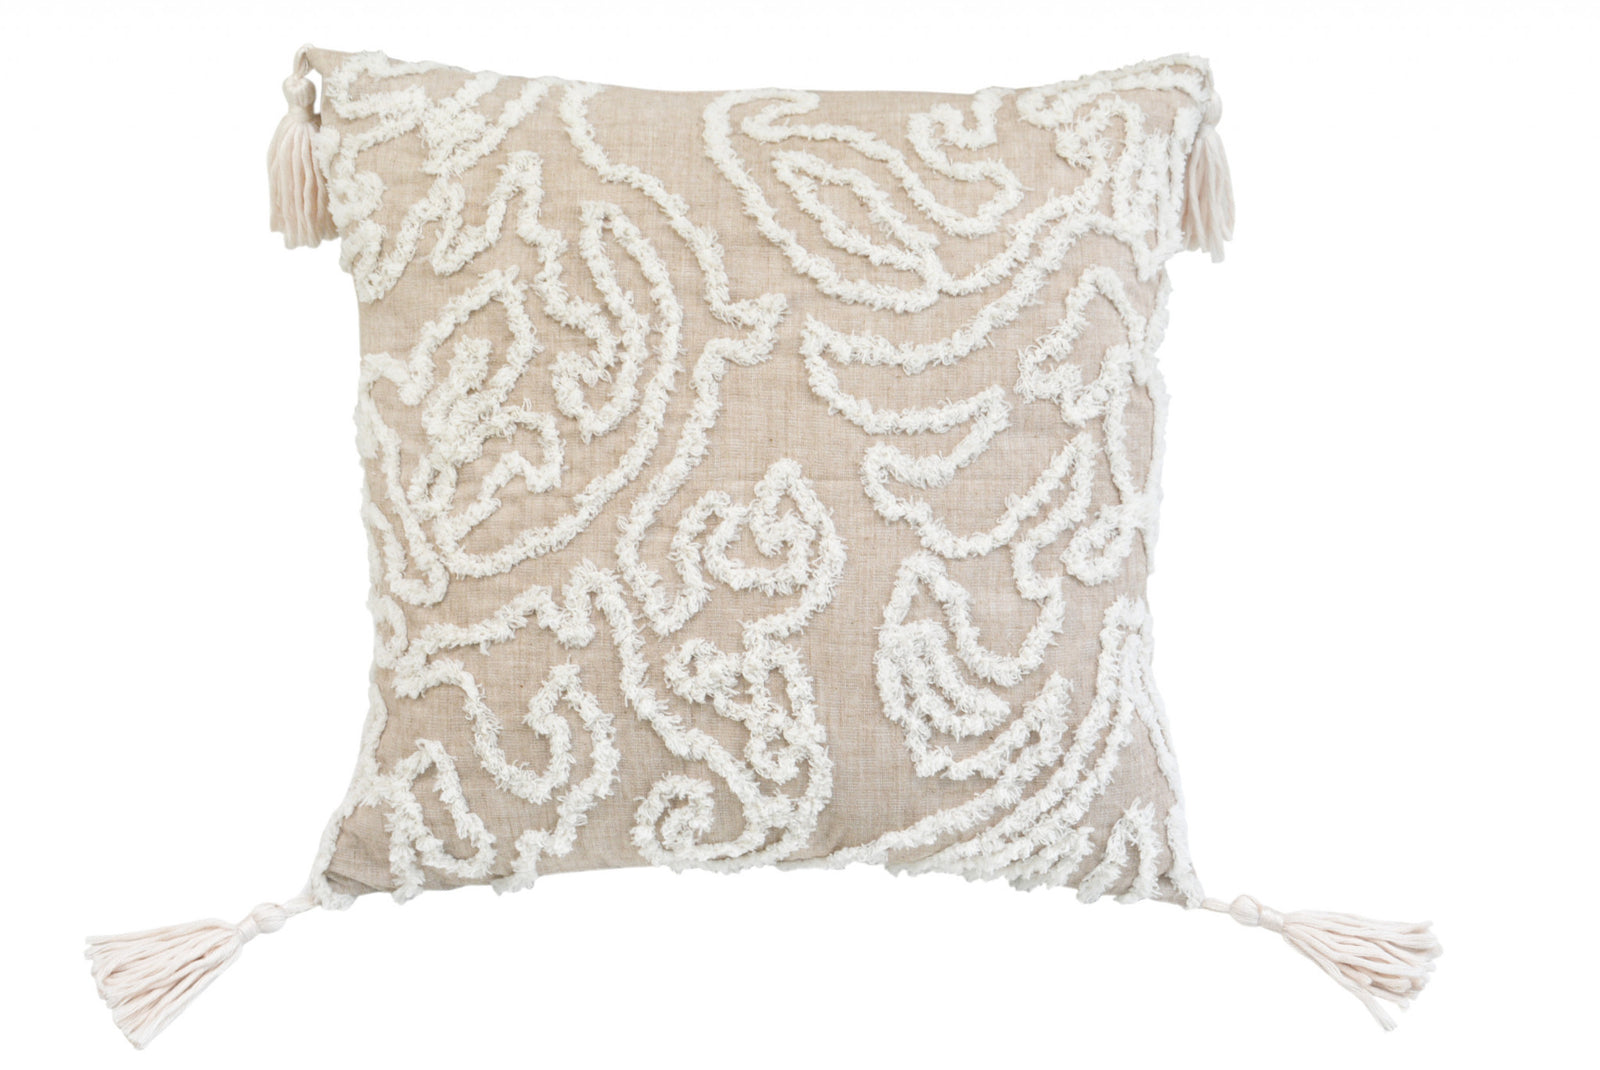 17" X 17" Beige And White Abstract Zippered Polyester Throw Pillow With Tassels